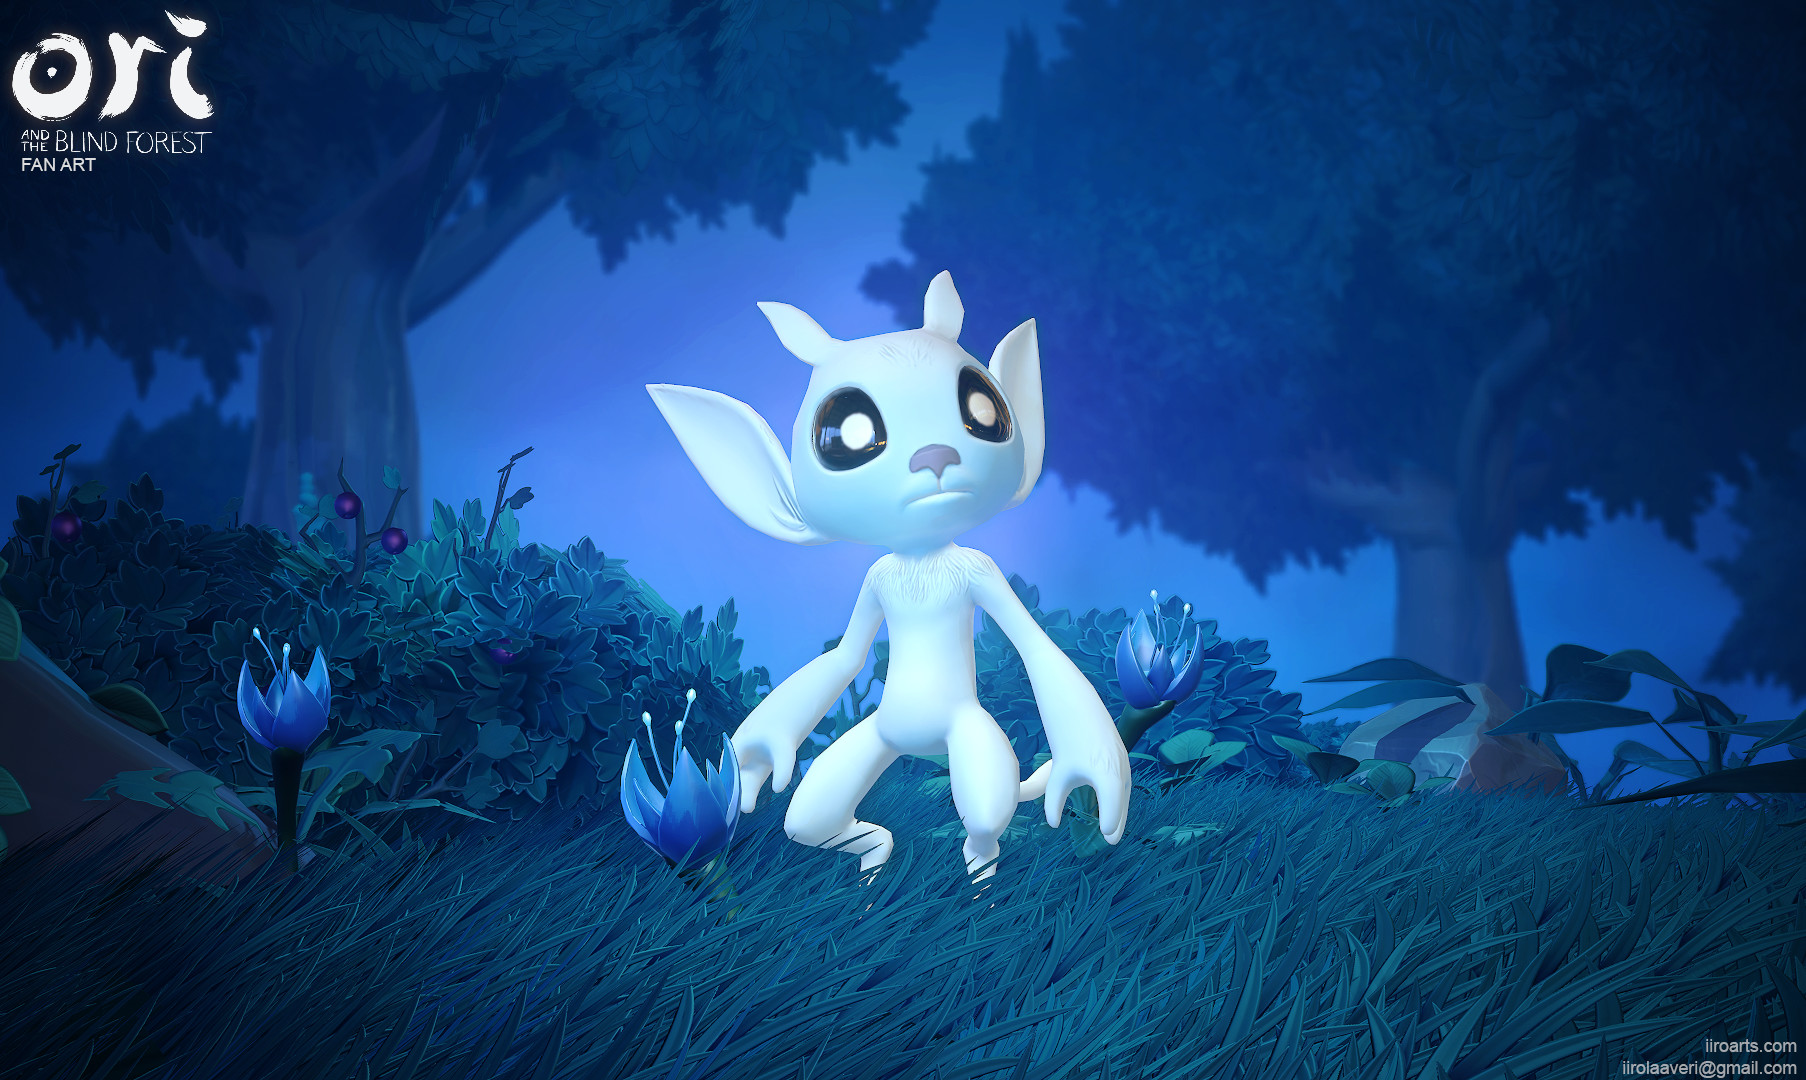 Ori And The Blind Forest Fan art.